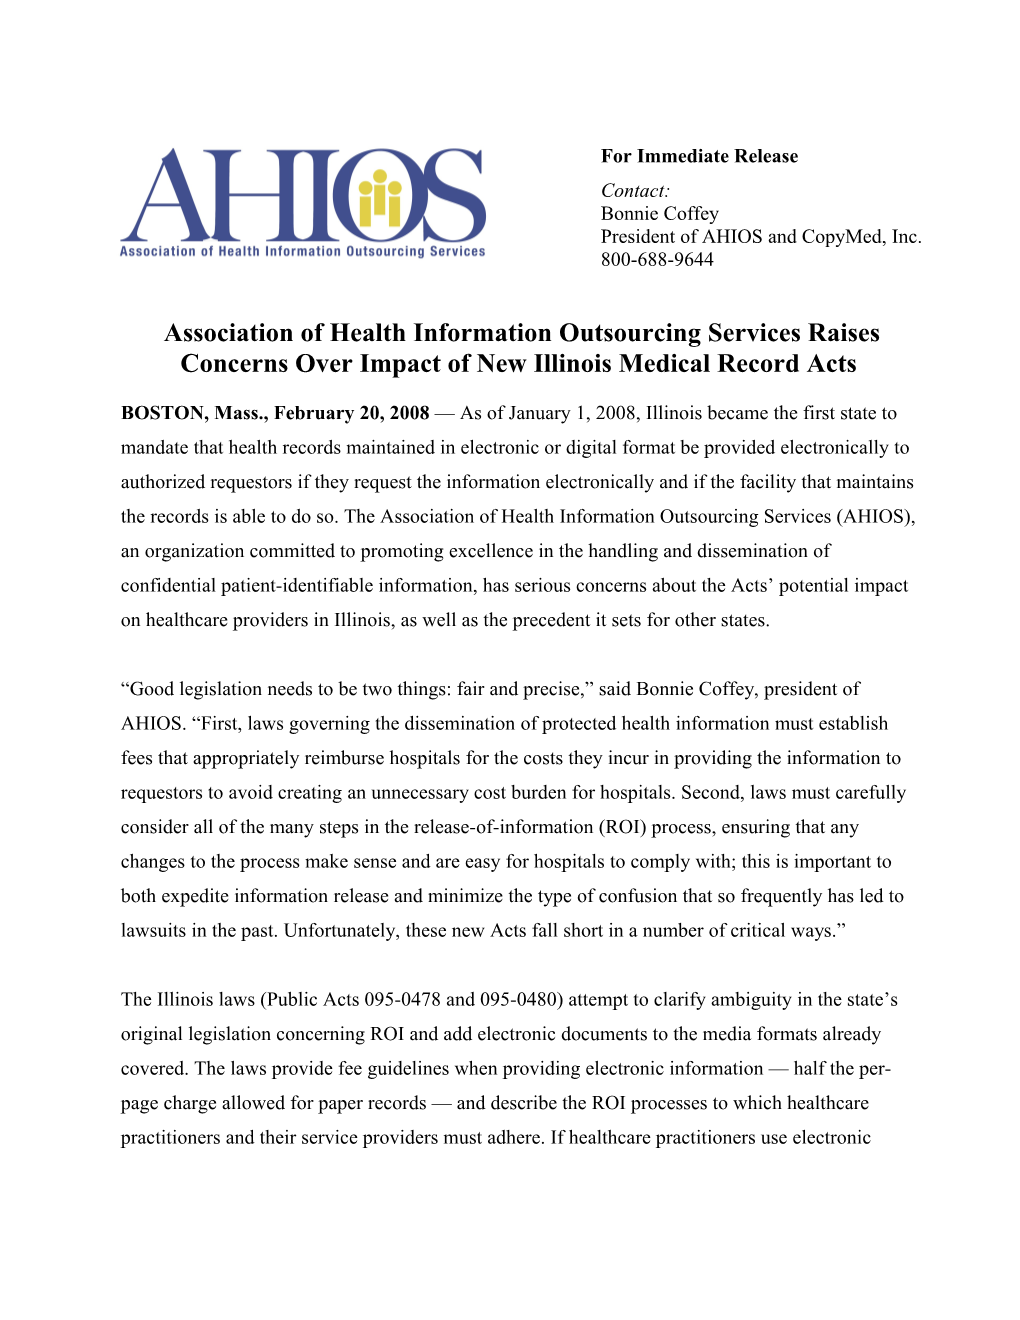 AHIOS Raises Concerns Overimpact of New Illinois Medical Record Acts Page 1